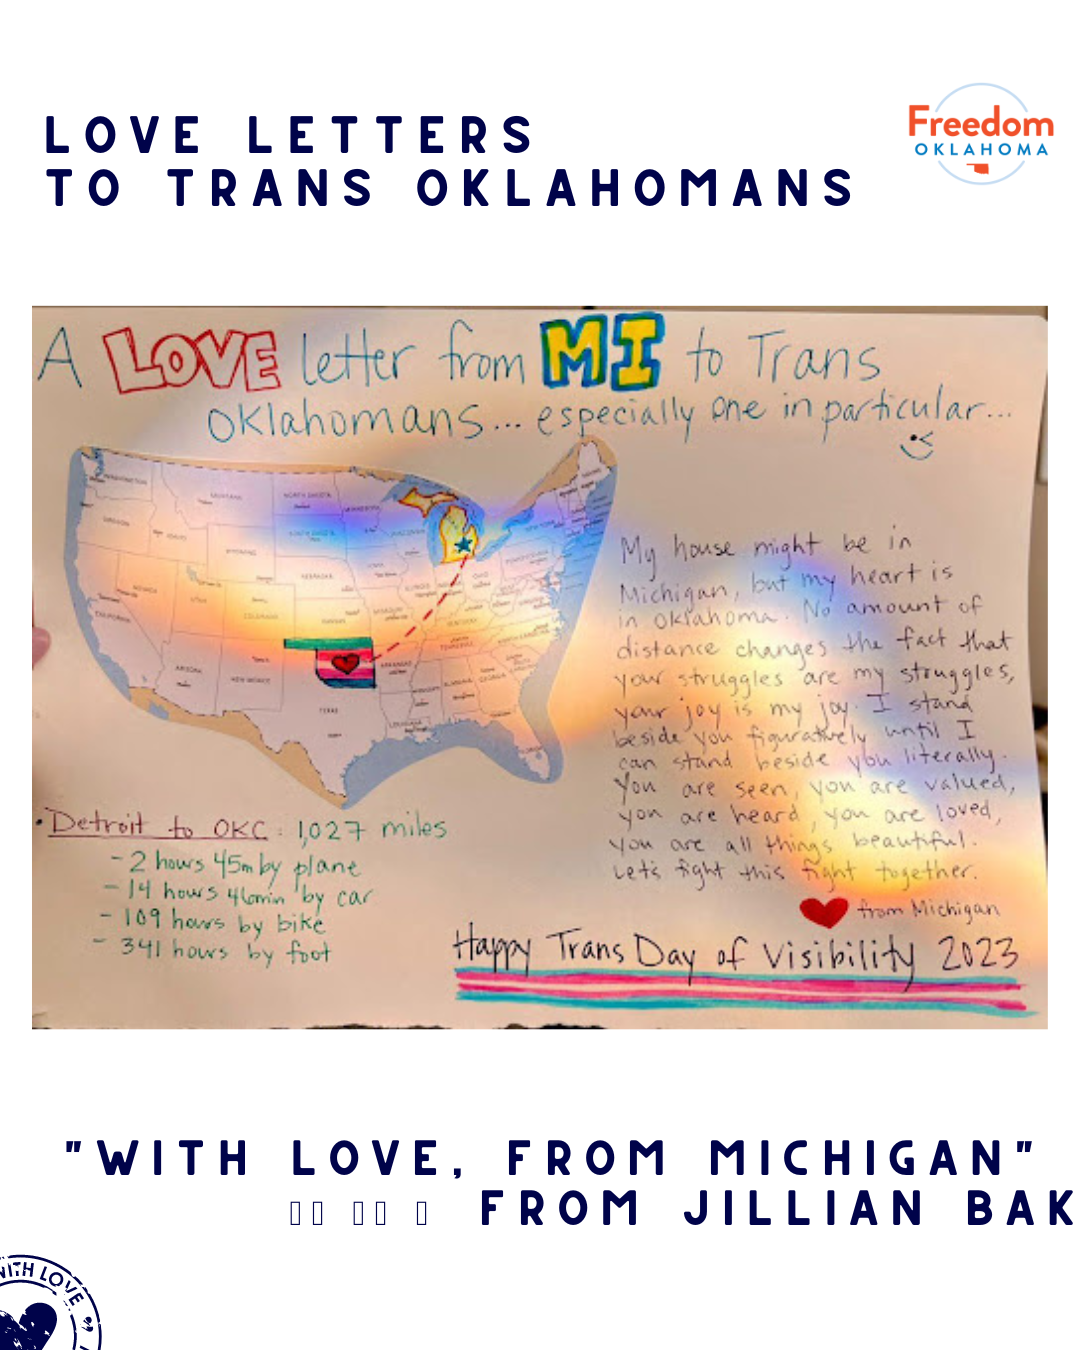  "Love Letters to Trans Oklahomans" and "'With love, from Michigan' from Jillian Baker" on a white background. Their art submission is in the center: Text written in various markers and pens: “A love letter from MI to Trans Oklahomans…especially one 